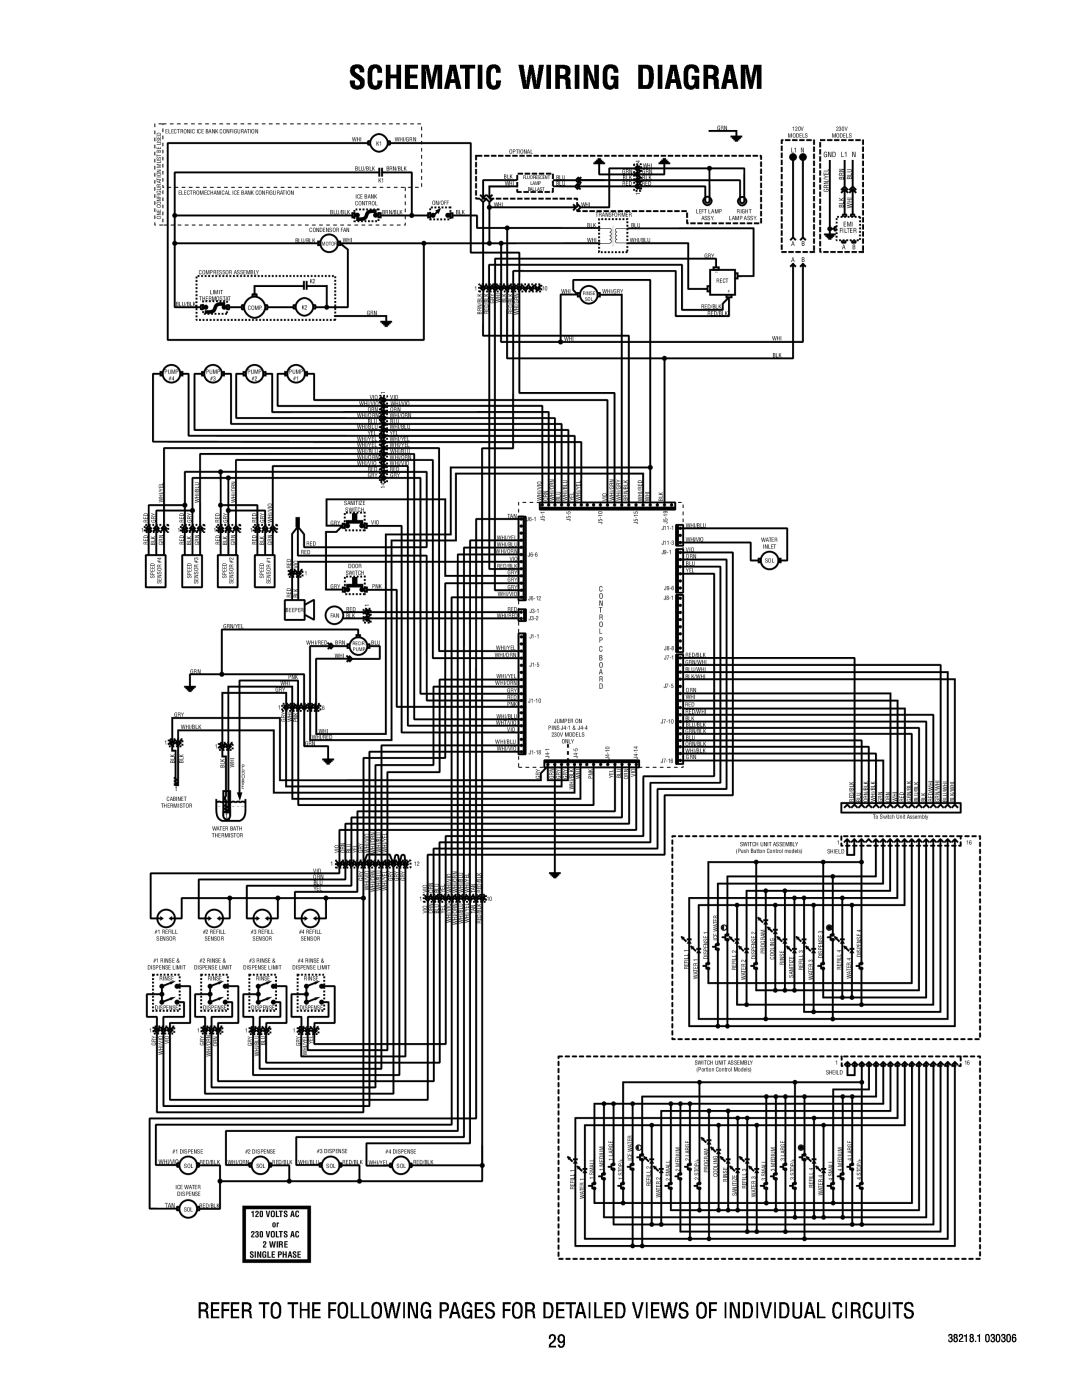 Bunn S/N 0005473 & UP manual Schematic Wiring Diagram, 38218.1, Wire Single Phase, Volts Ac 